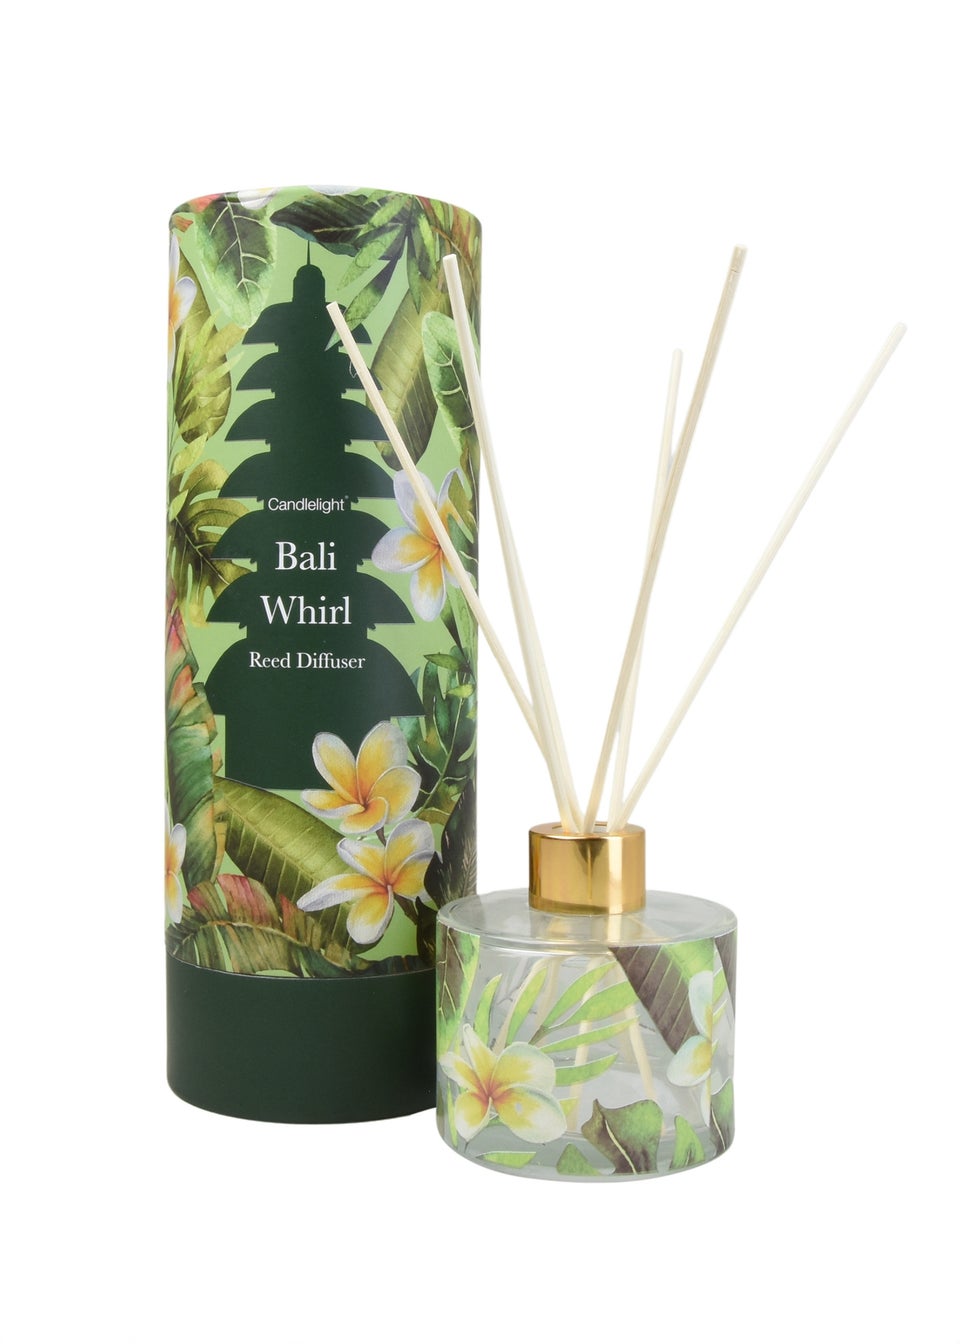 Candlelight Bali Whirl Reed Diffuser (150ml)